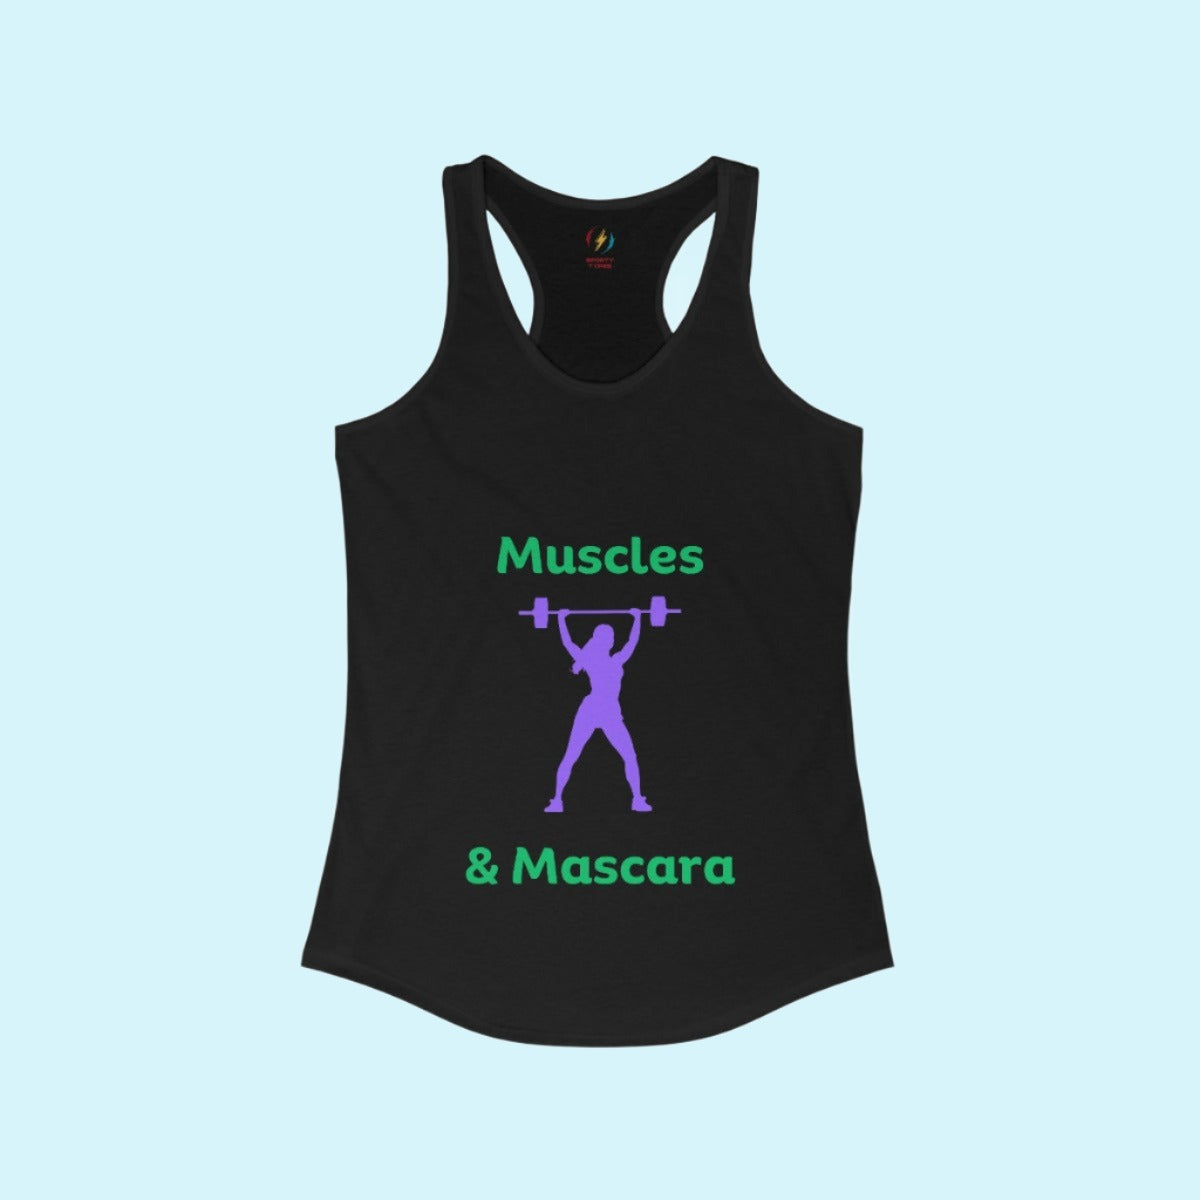 Black Women's Muscles And Mascara Performance Racerback Tank Top